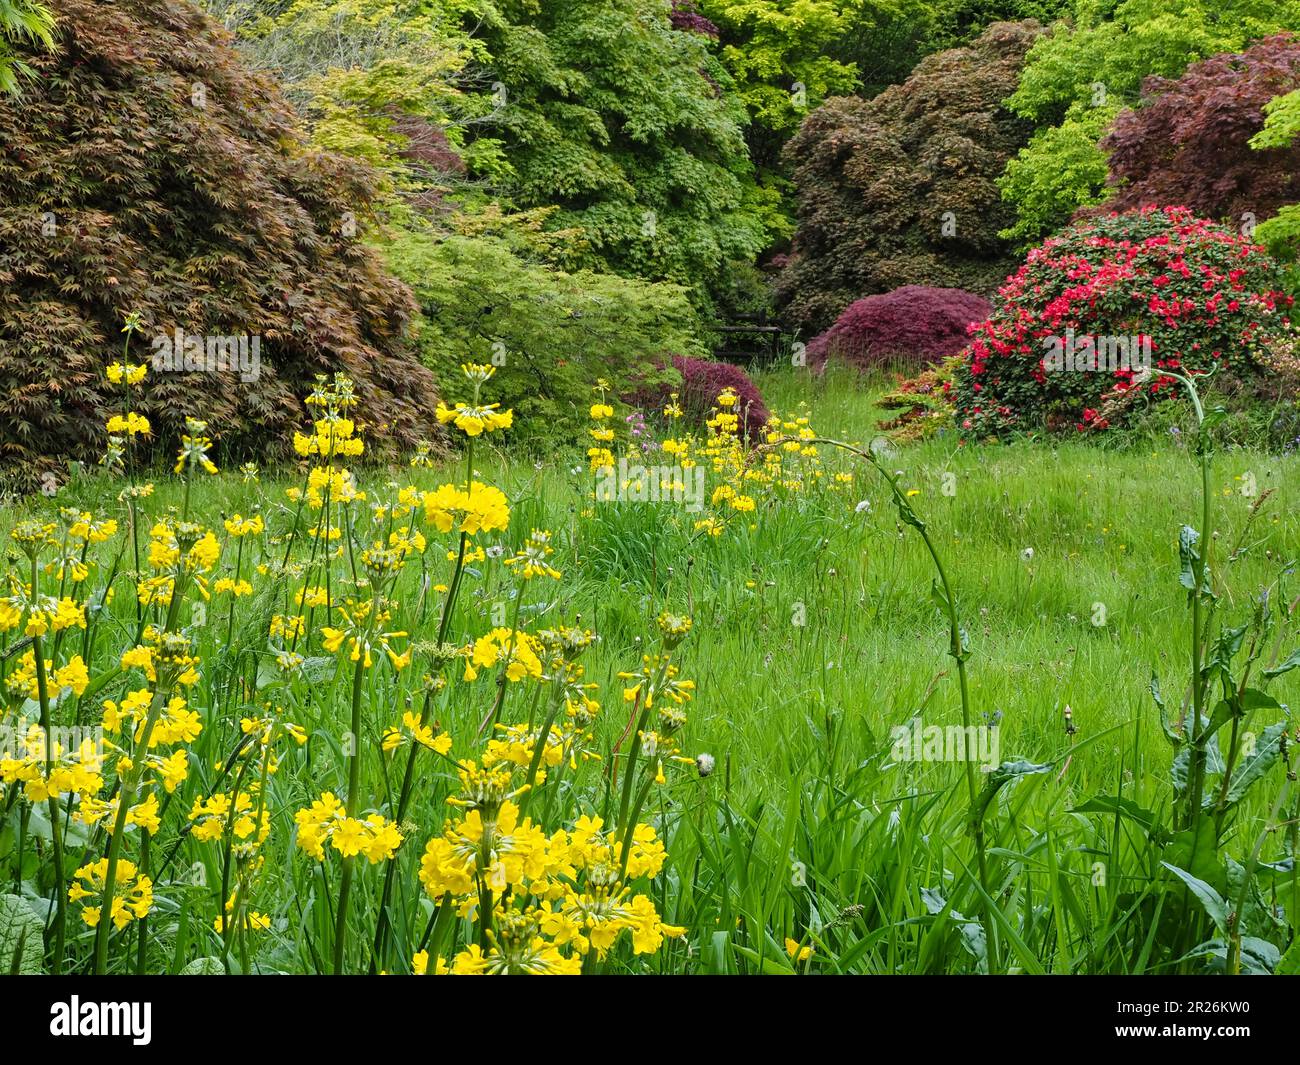 Stands of the hardy yellow candelabra primula, Primula helodoxa, line a small rill at The Garden House, Buckland Monachorum, UK Stock Photo